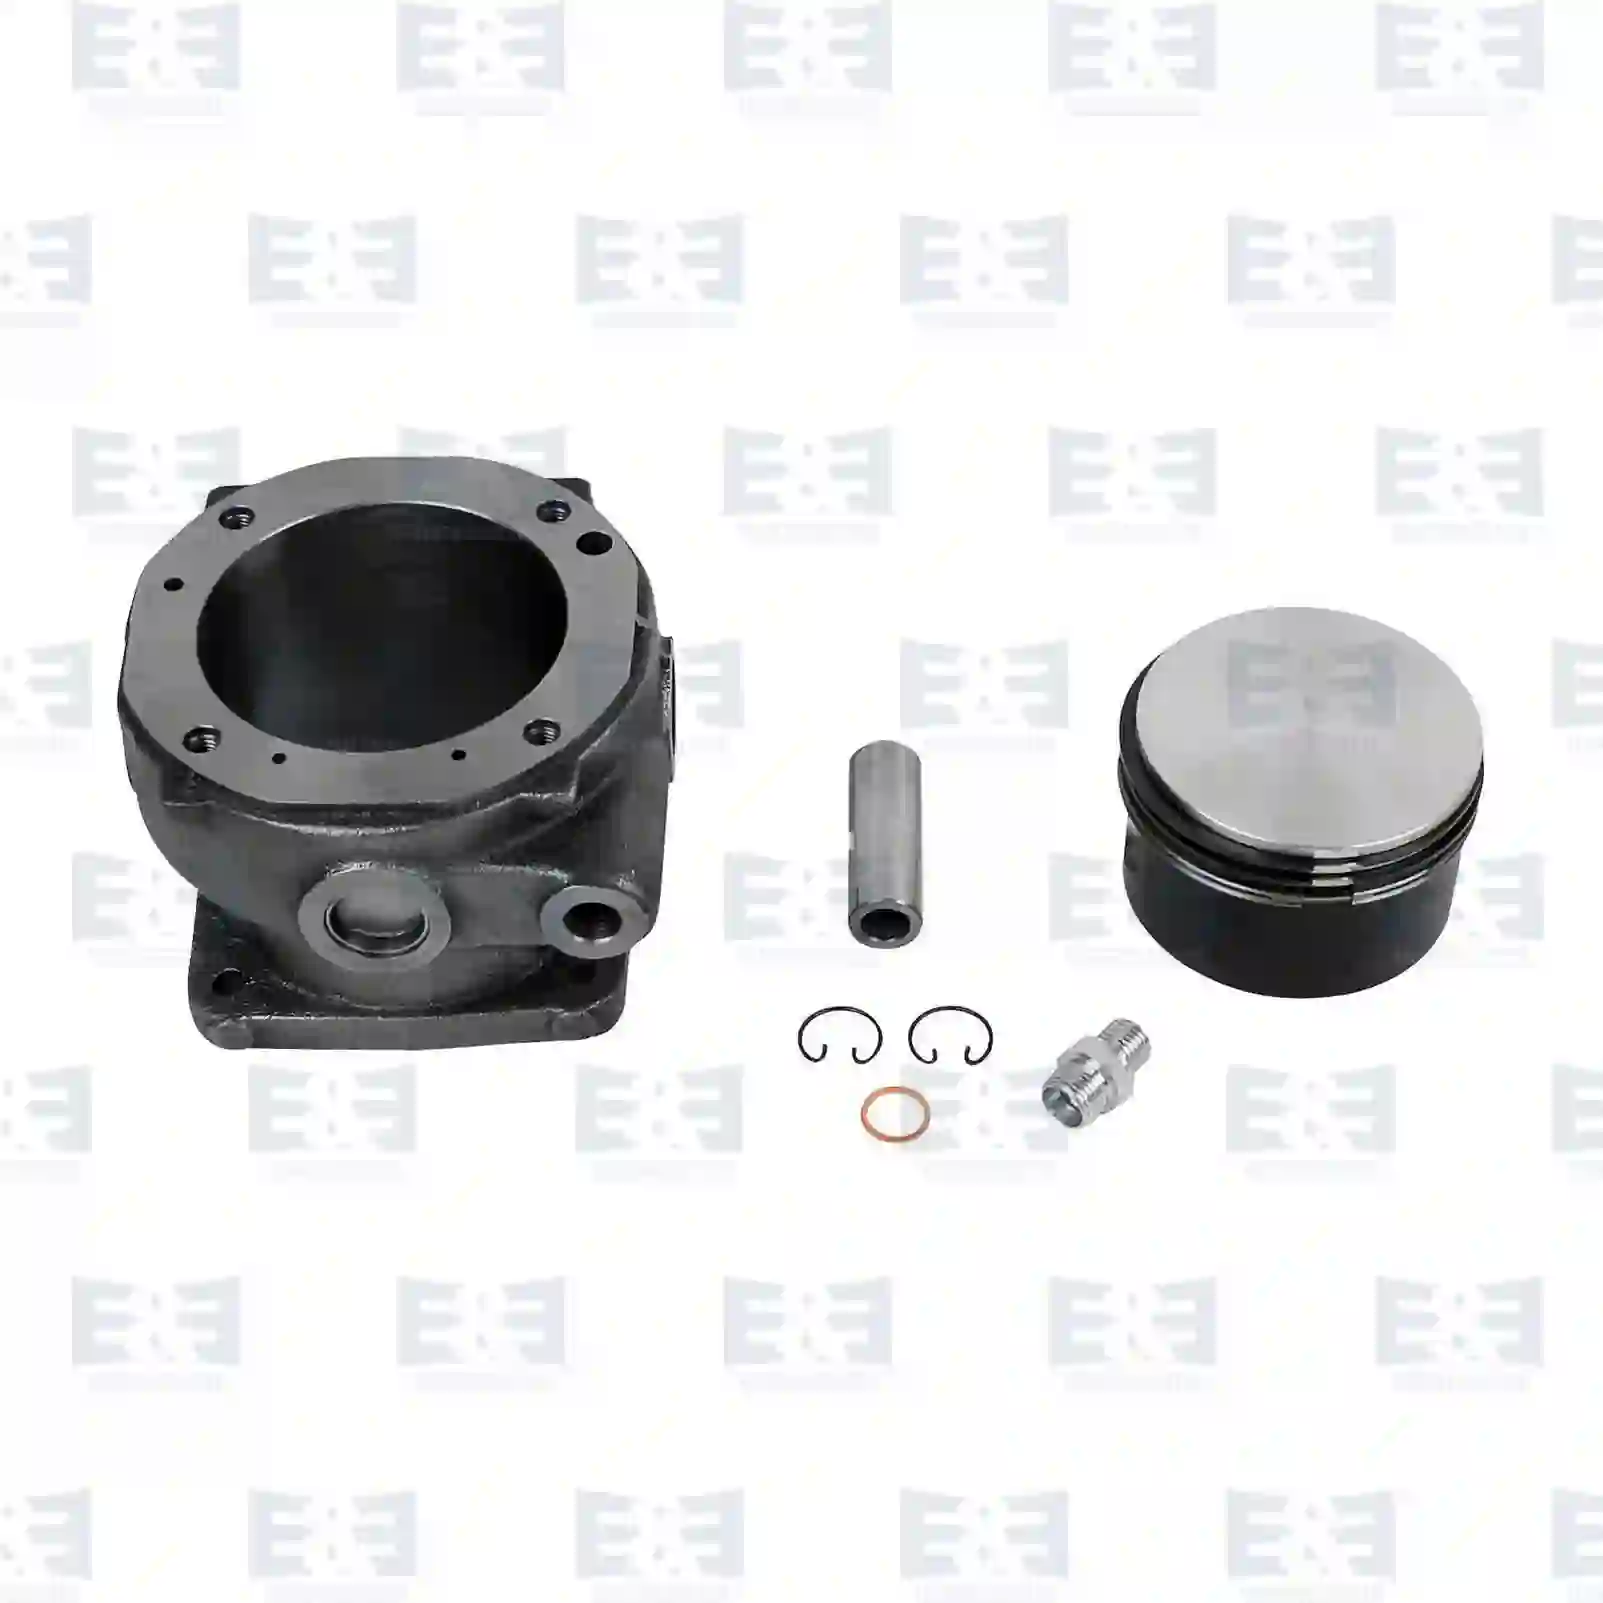 Piston and liner kit, water cooled, 2E2296743, 51541050006, 51541056002, 51541056004, 51541056005, 51541056007, 51541056008, 4021300208, 4021300308, 4021300380, 4021300608, 4021310502, 4271300008, ZG50562-0008 ||  2E2296743 E&E Truck Spare Parts | Truck Spare Parts, Auotomotive Spare Parts Piston and liner kit, water cooled, 2E2296743, 51541050006, 51541056002, 51541056004, 51541056005, 51541056007, 51541056008, 4021300208, 4021300308, 4021300380, 4021300608, 4021310502, 4271300008, ZG50562-0008 ||  2E2296743 E&E Truck Spare Parts | Truck Spare Parts, Auotomotive Spare Parts